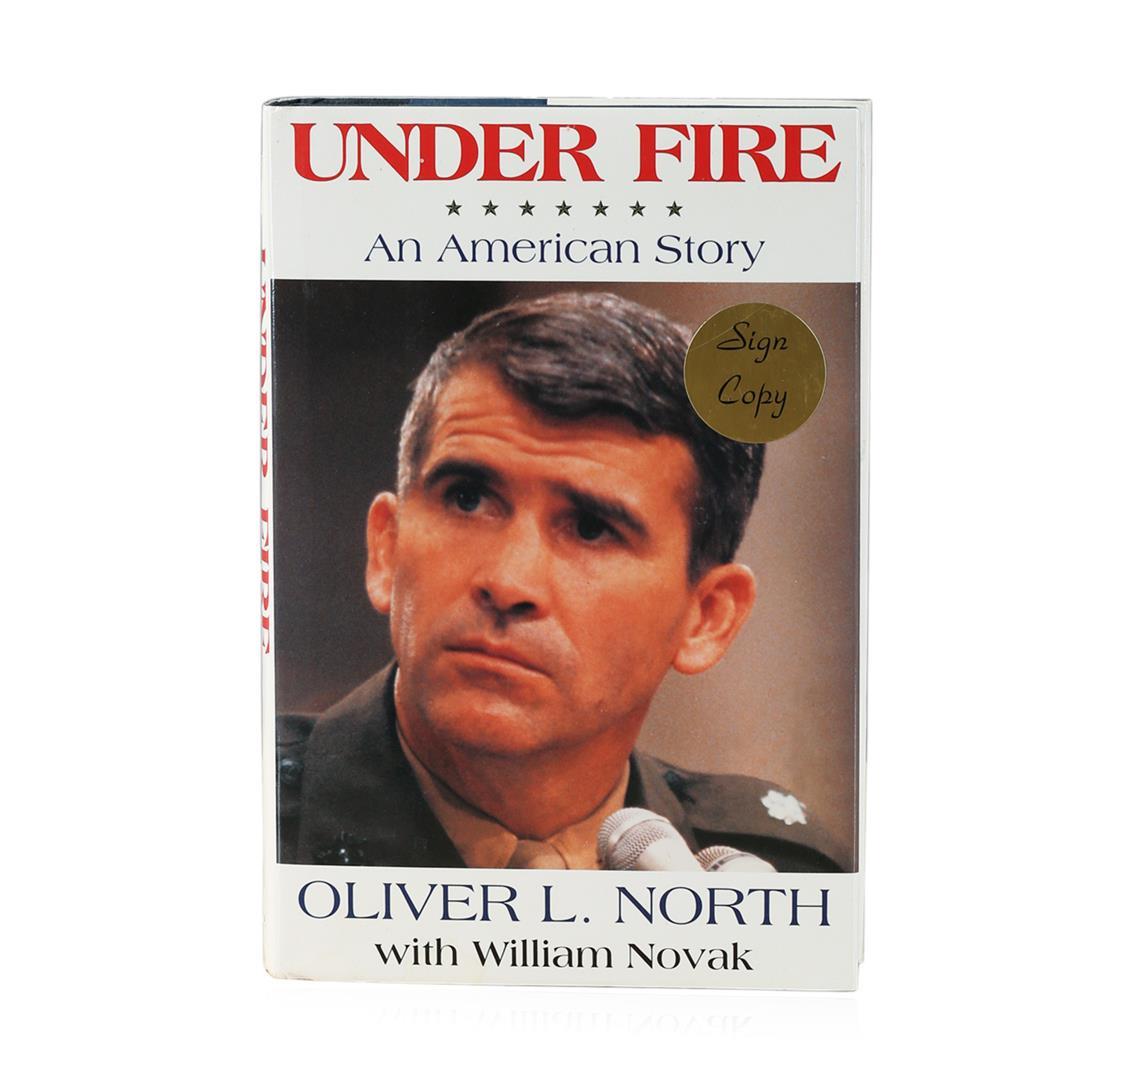 Signed Copy of Under Fire: An American Story by Oliver L. North